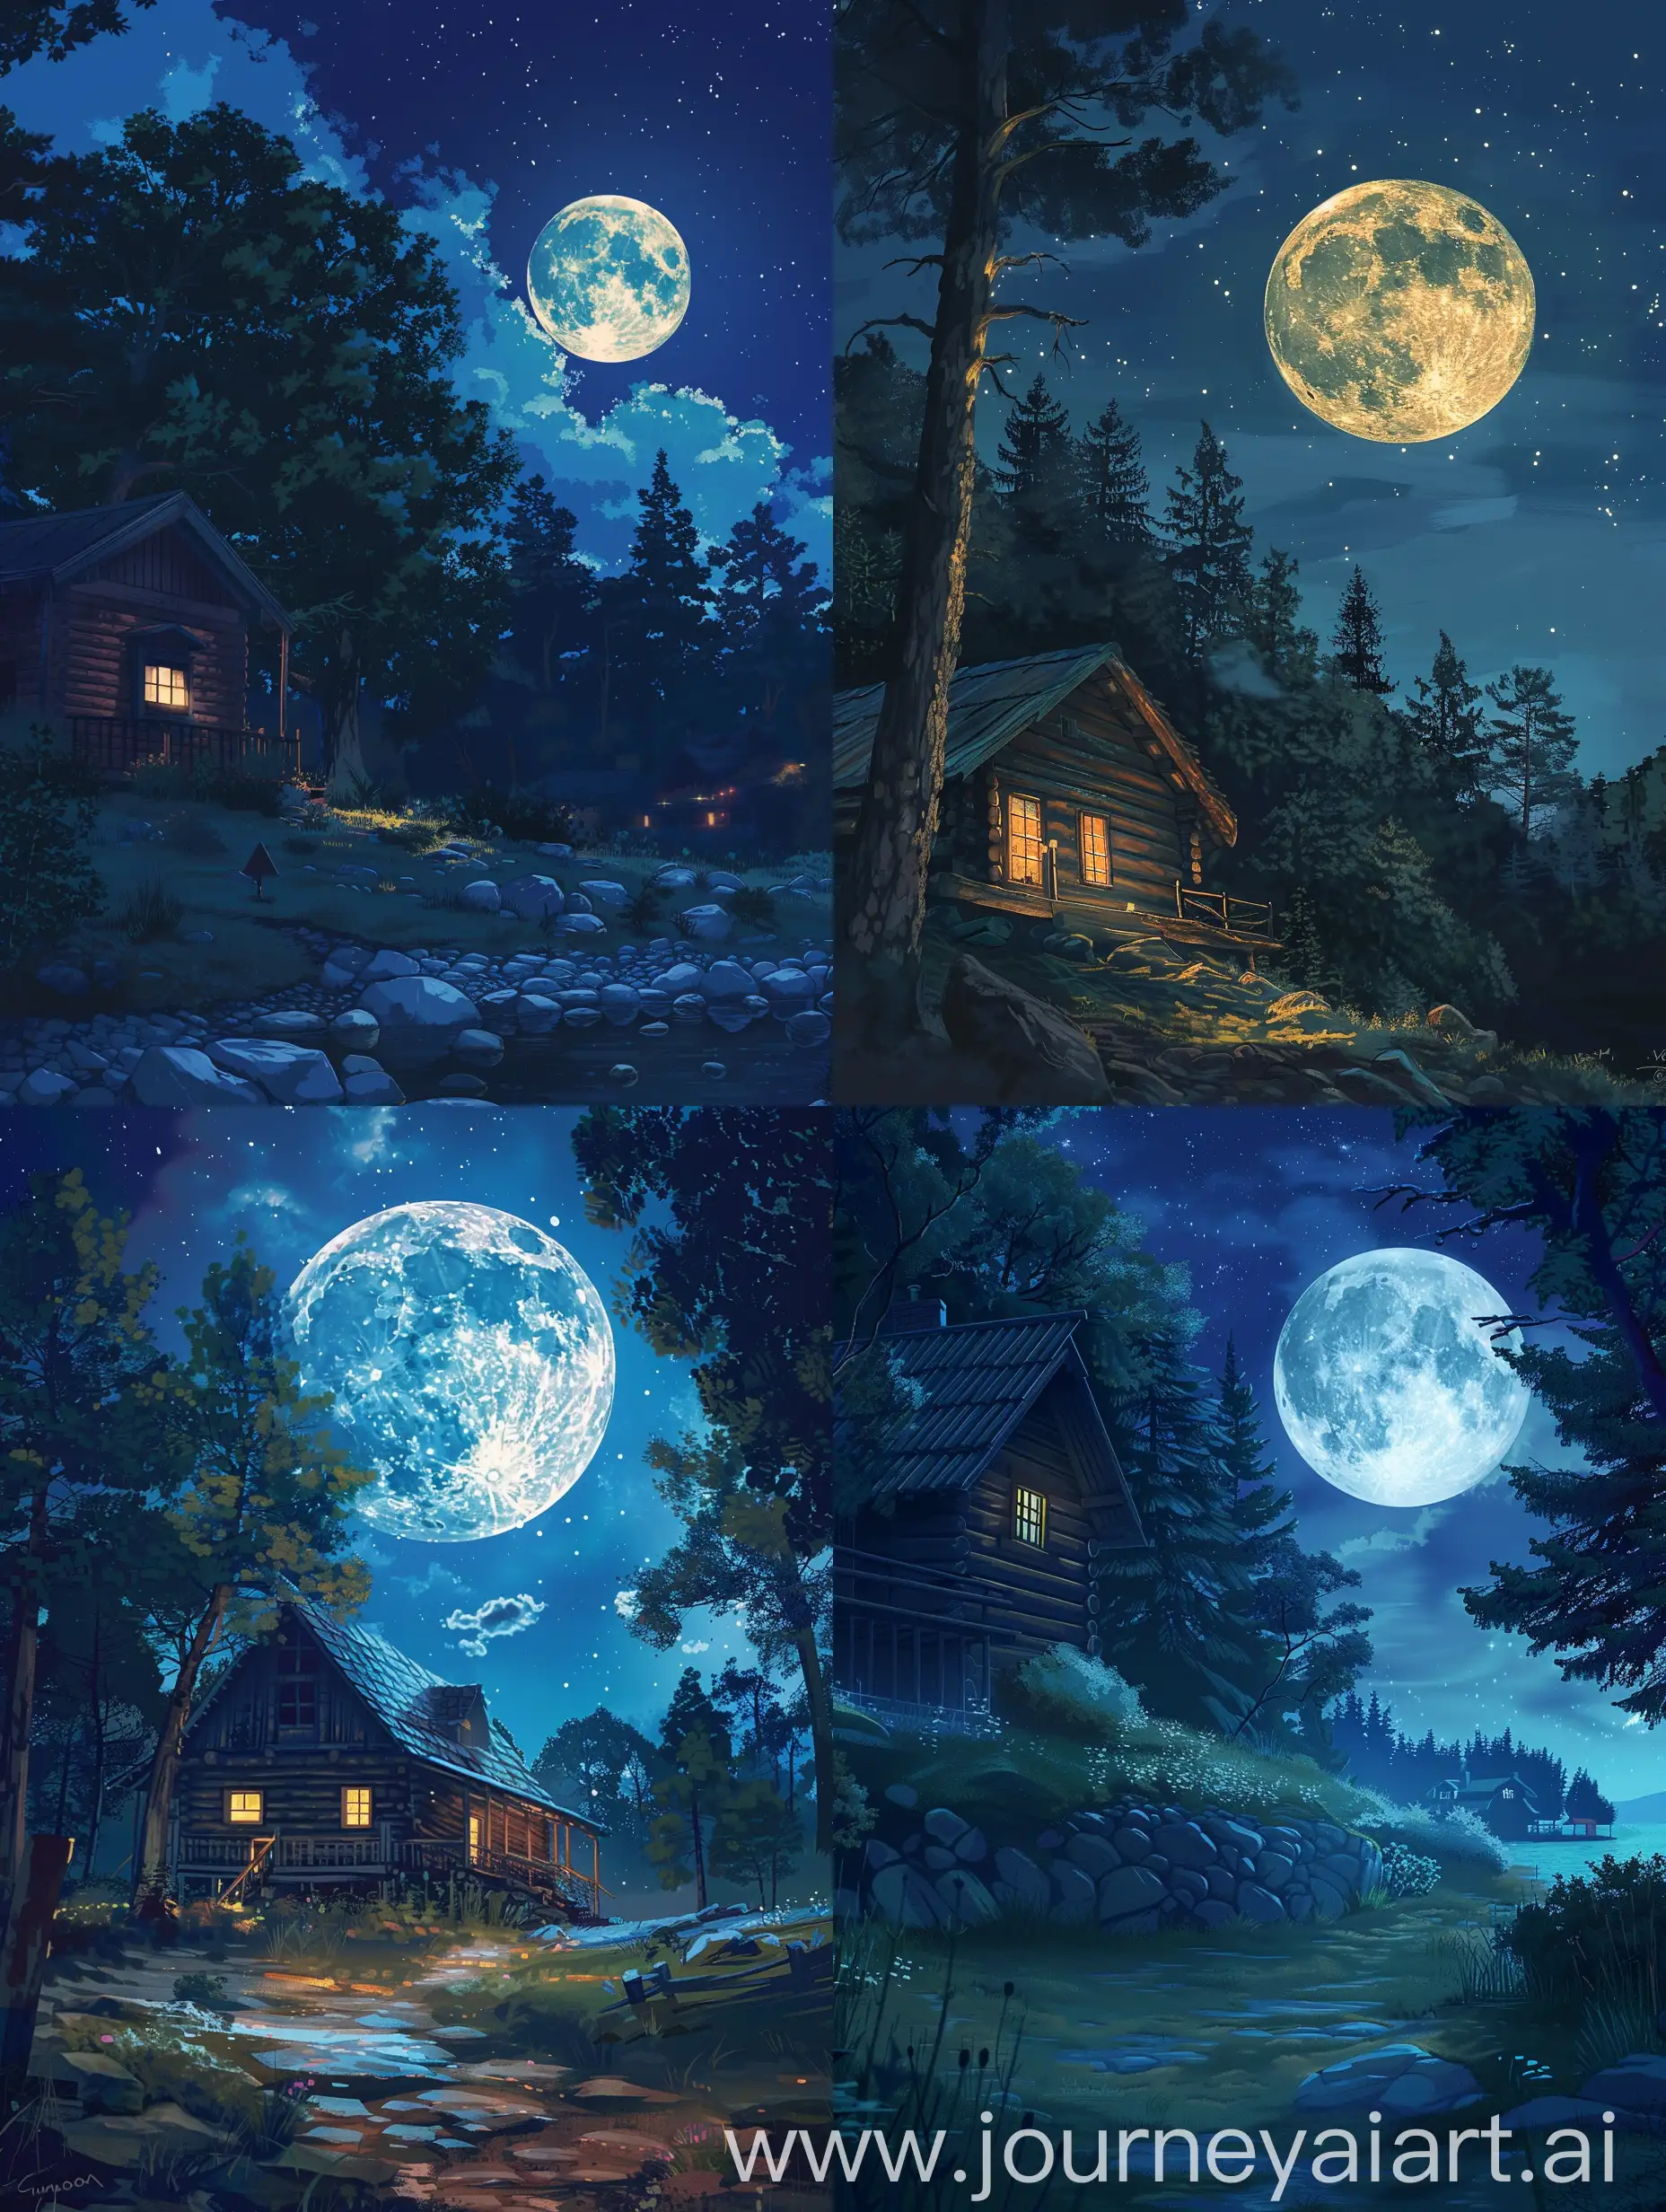 night scene of a cabin in the woods with a full moon, beautiful moonlight night, night scenery, moonlit night dreamy atmosphere, calm night. digital illustration, moonlit night, nighttime nature landscape, anime background art, beautiful wallpaper, at night with full moon, night time moonlight, at night with moon light, dreamy night, nightime village background, 